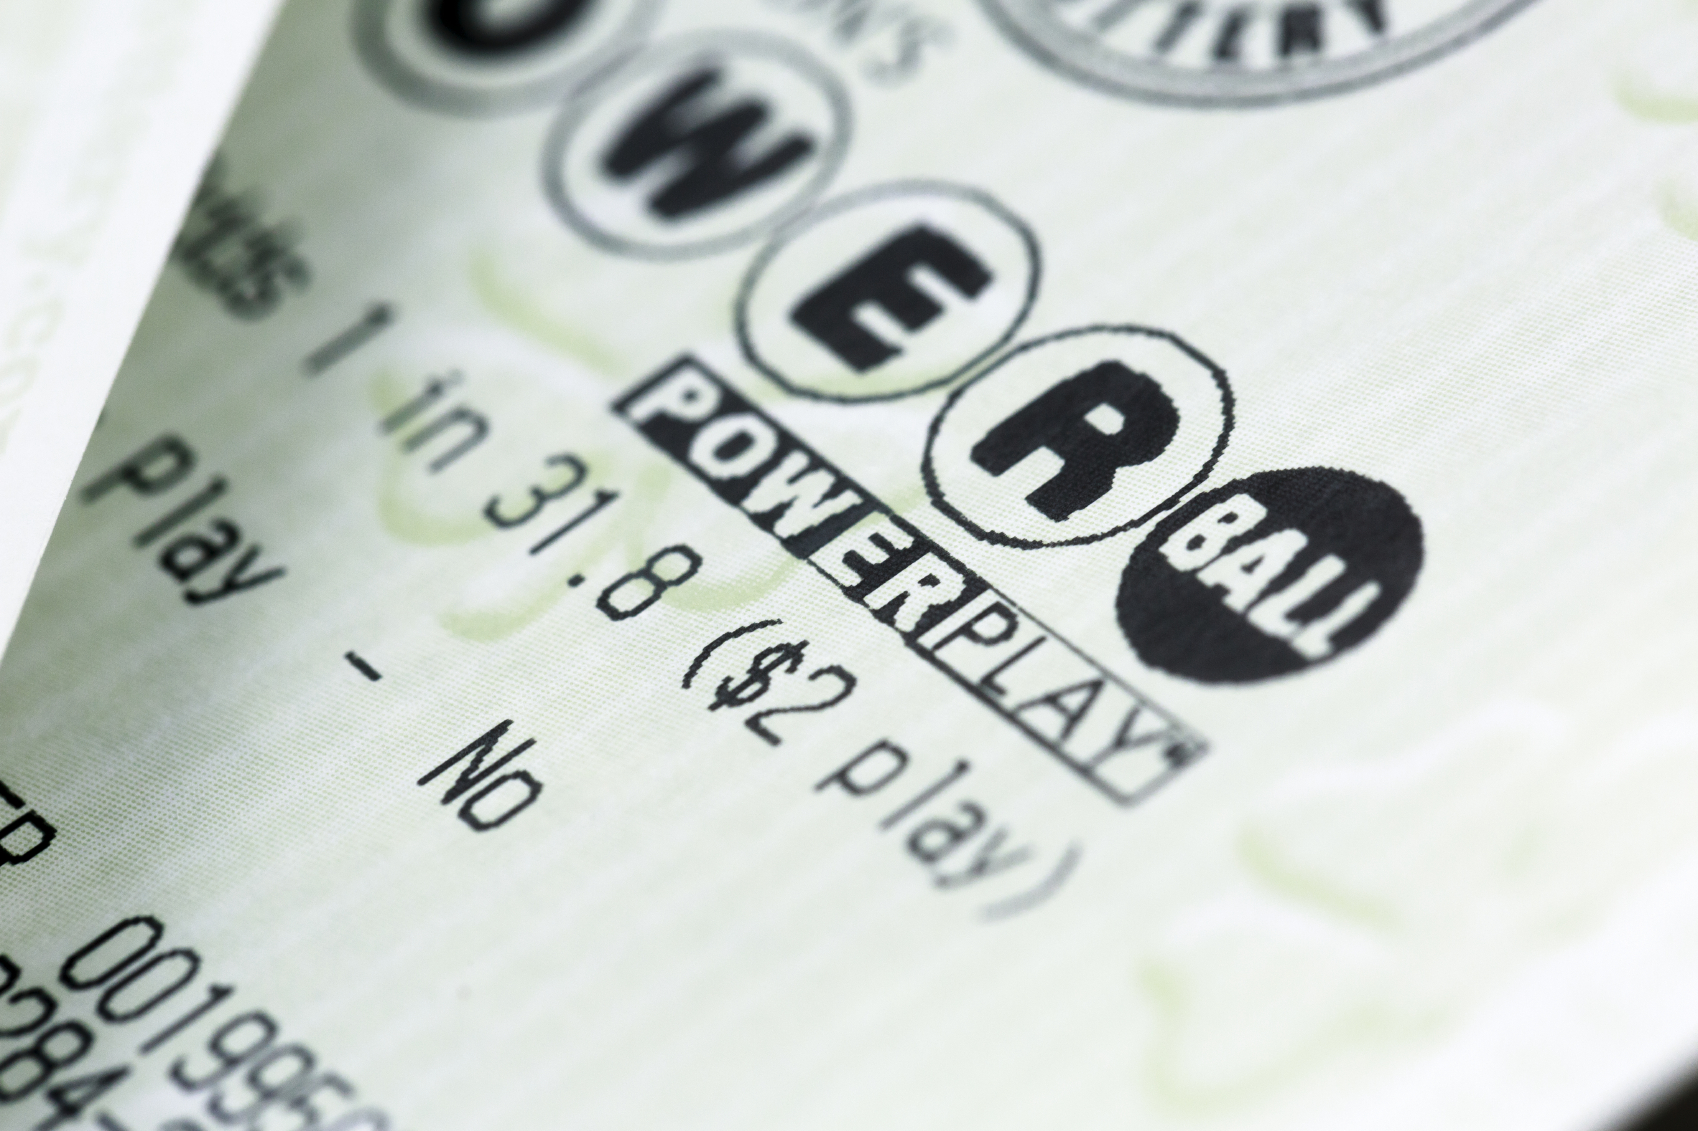 The Powerball lottery is hitting a record jackpot of $1.5 billion, but the odds are stacked against you.